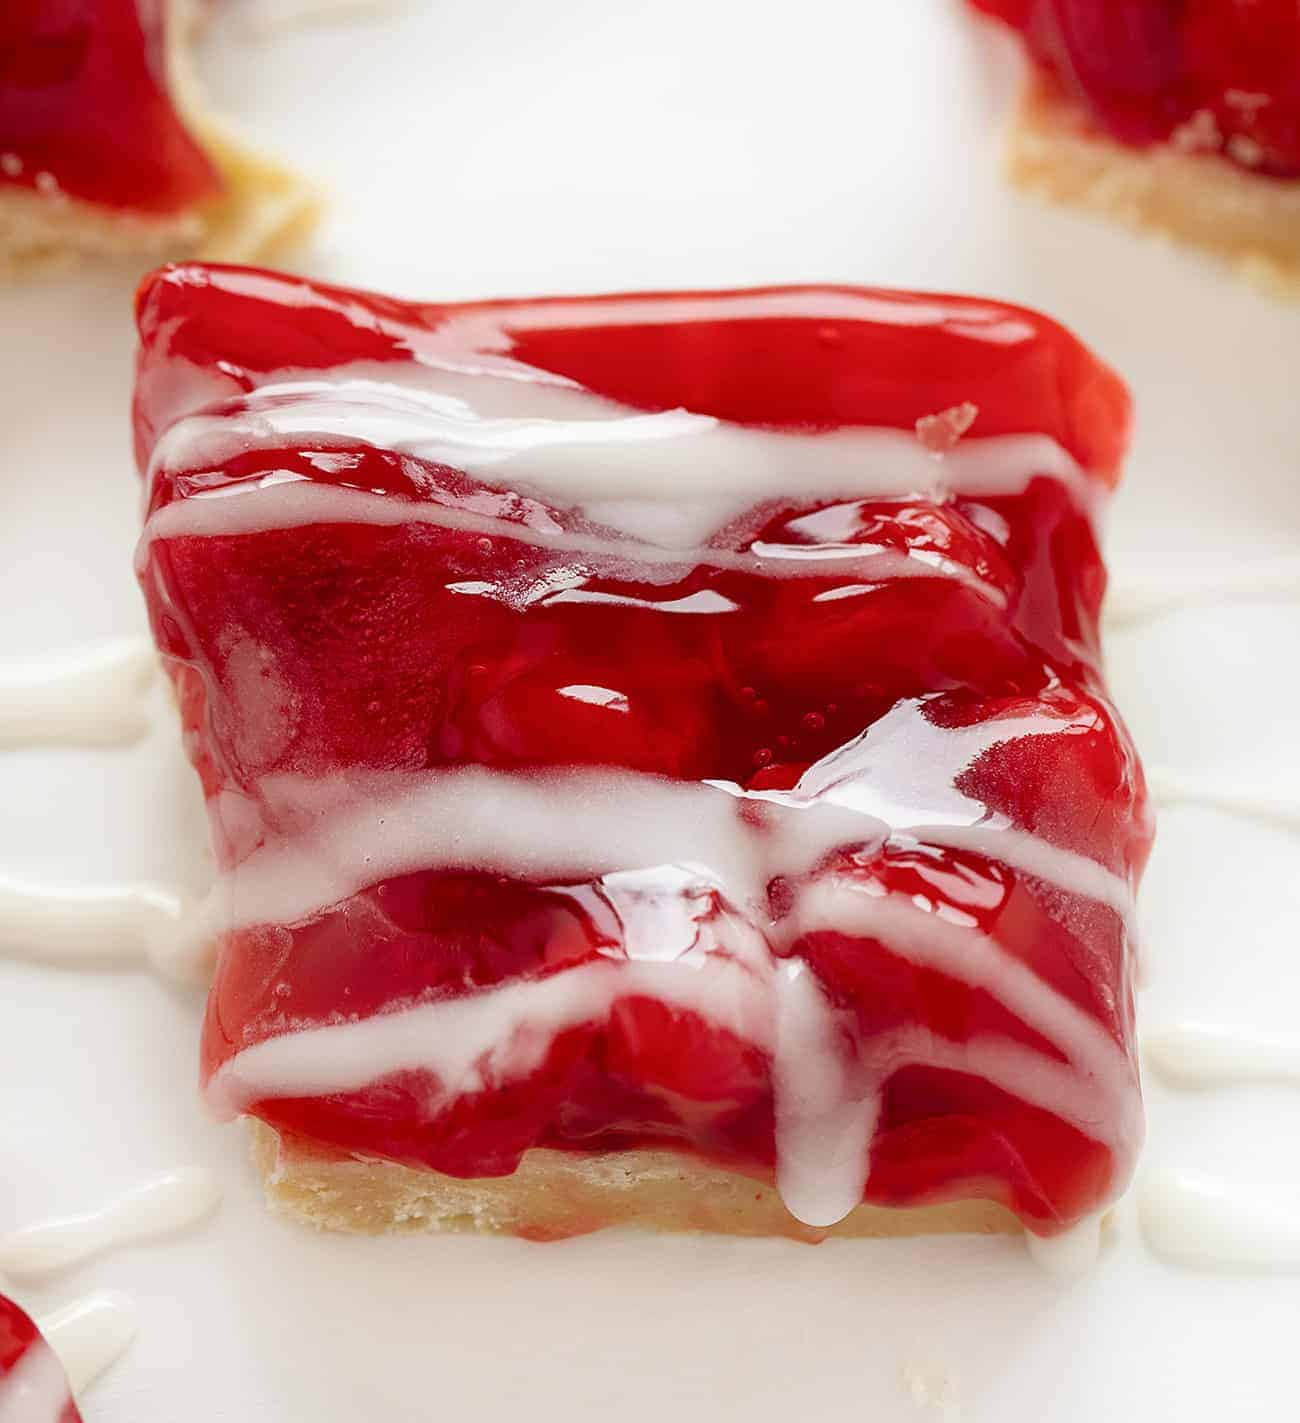 Cherry Bars with Homemade Icing